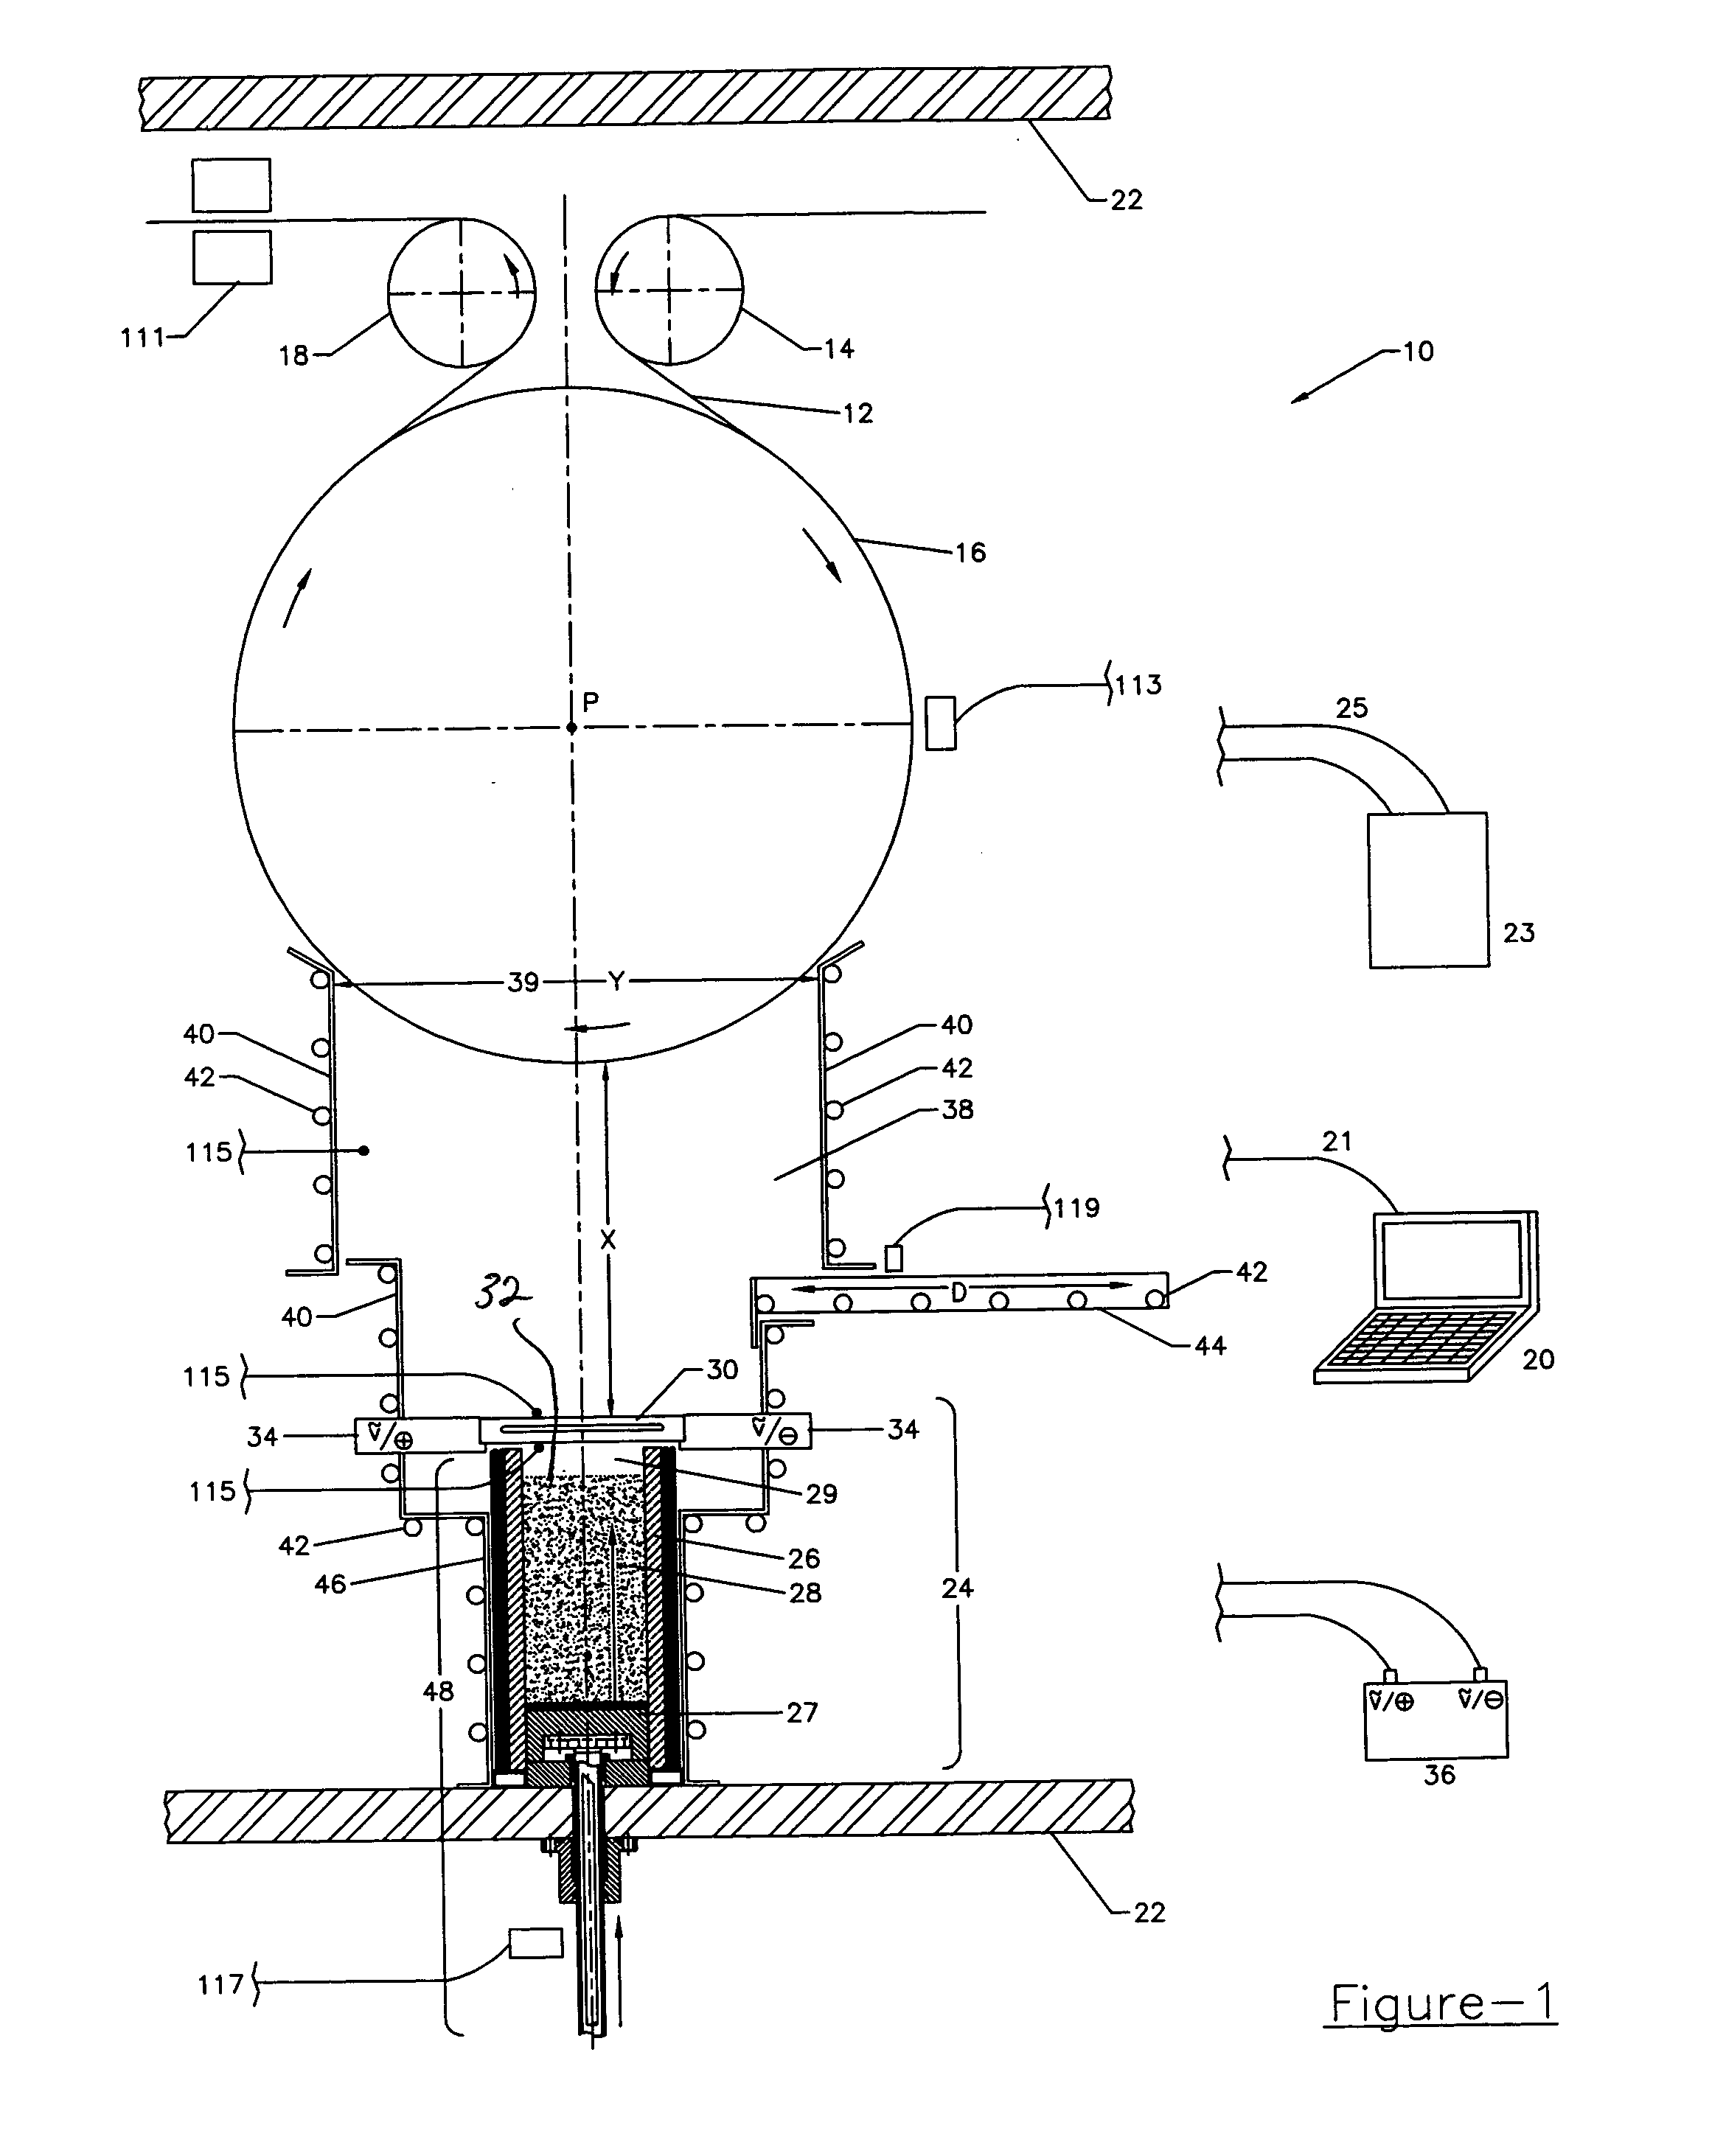 Multi-layered radiant thermal evaporator and method of use